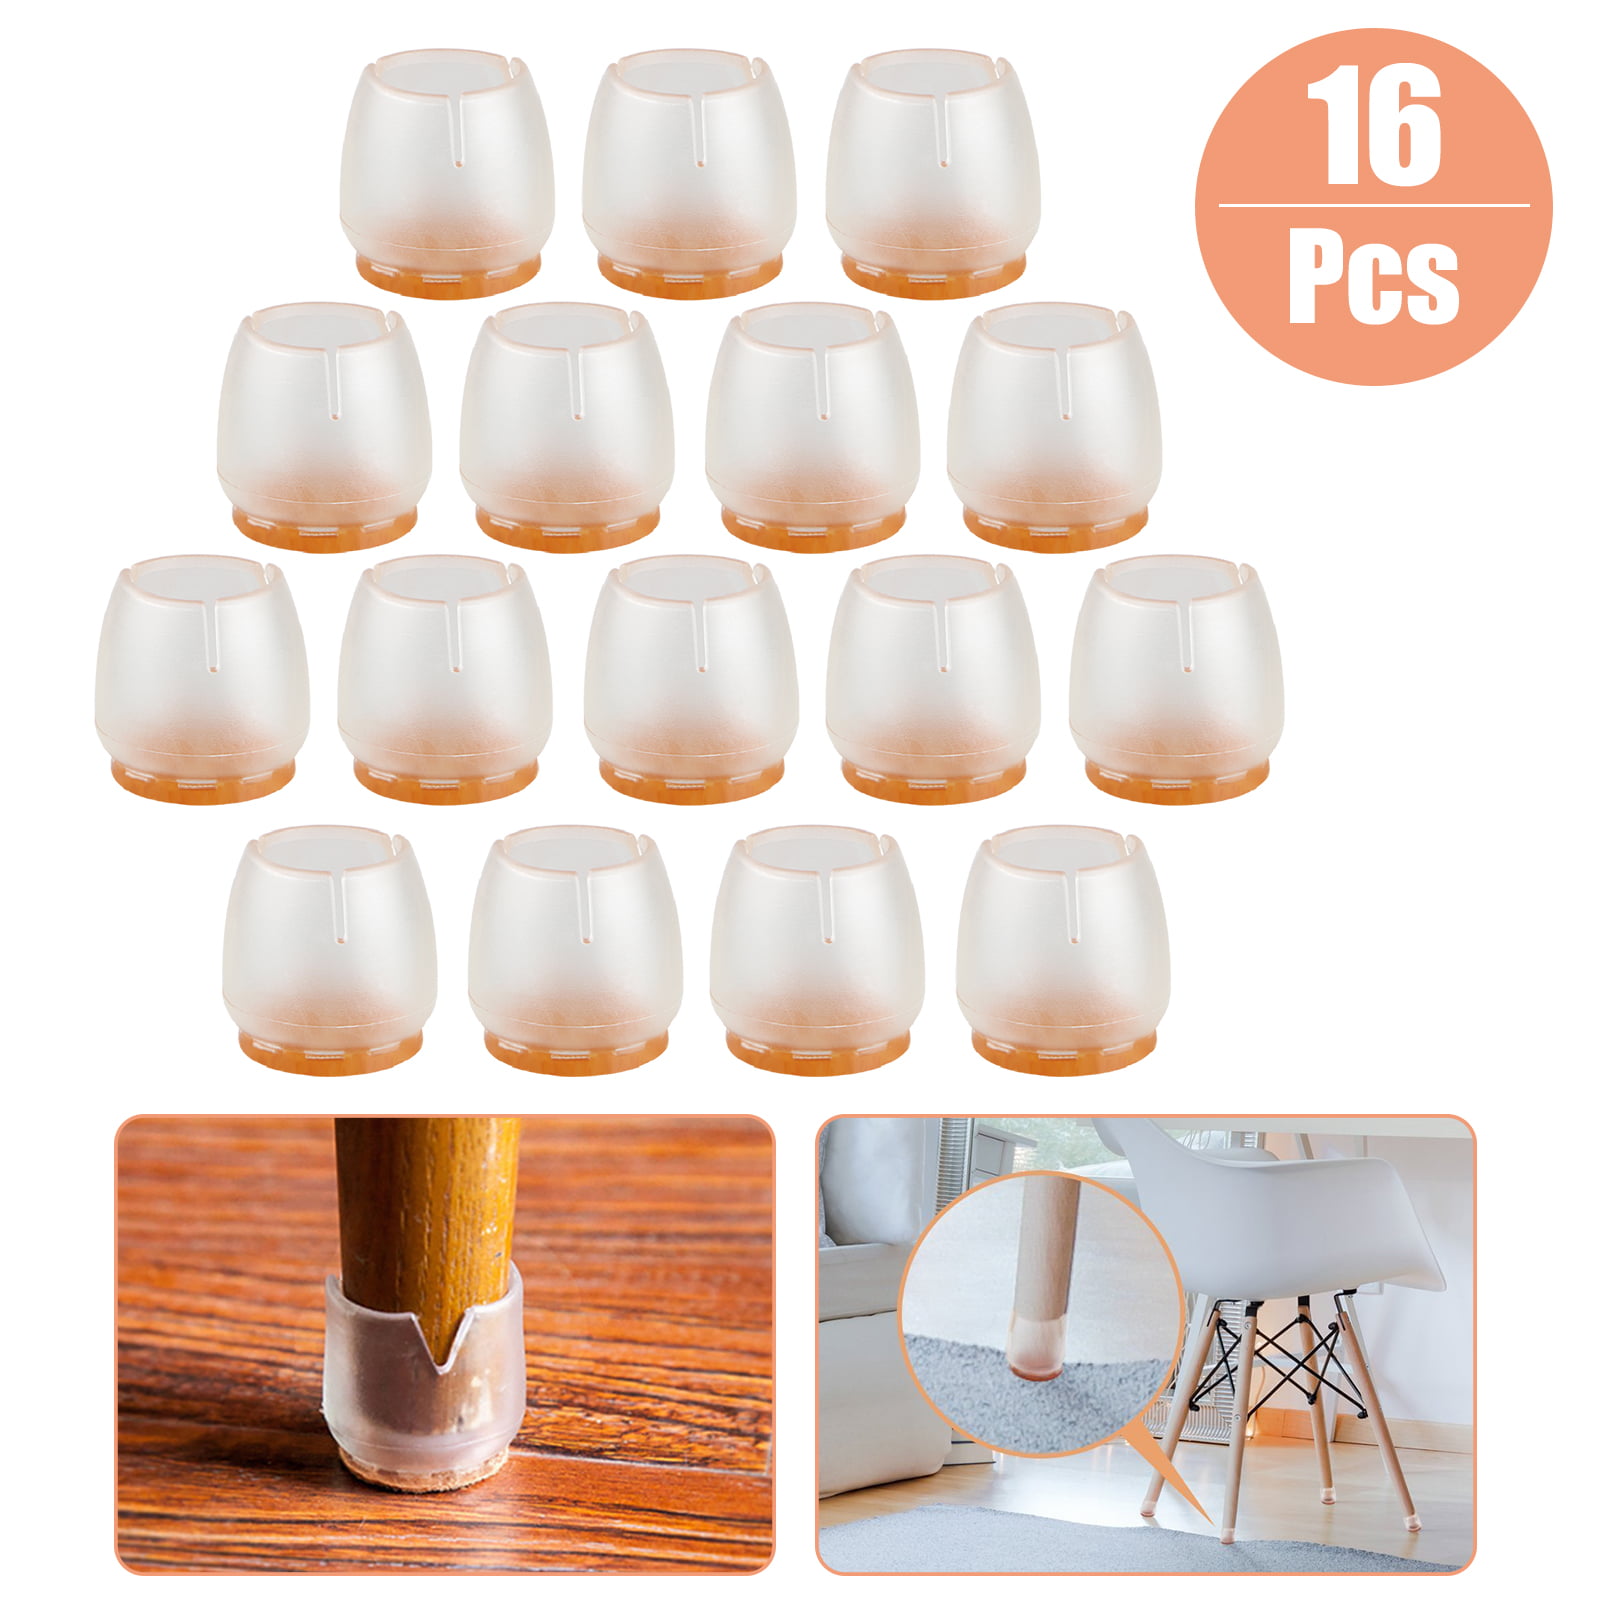 16pcs Round Silicone Chair Leg Caps Feet Pads Table Covers Wood Floor Protector